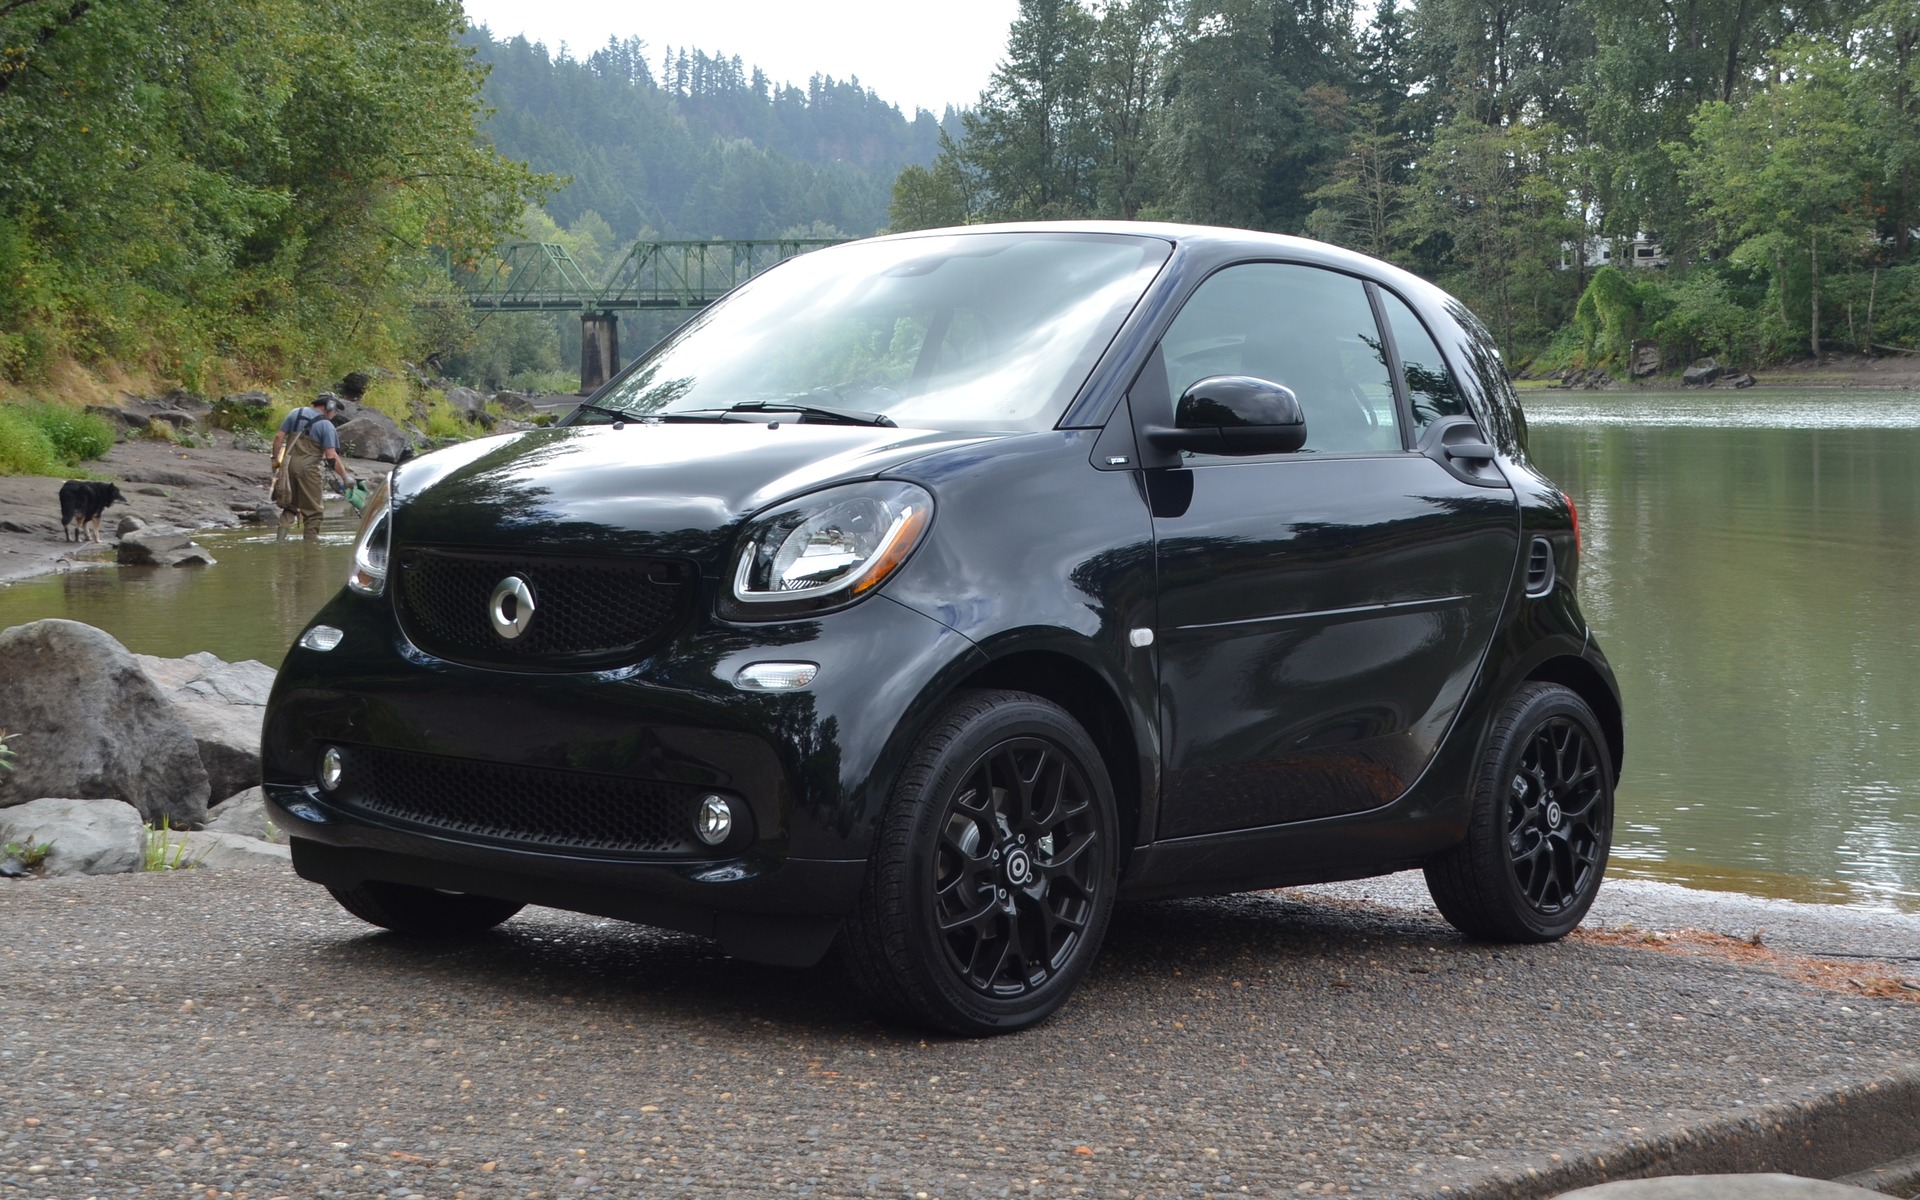 2016 smart Fortwo: I Just Can't Wait To Get On The Road Again - The Car  Guide